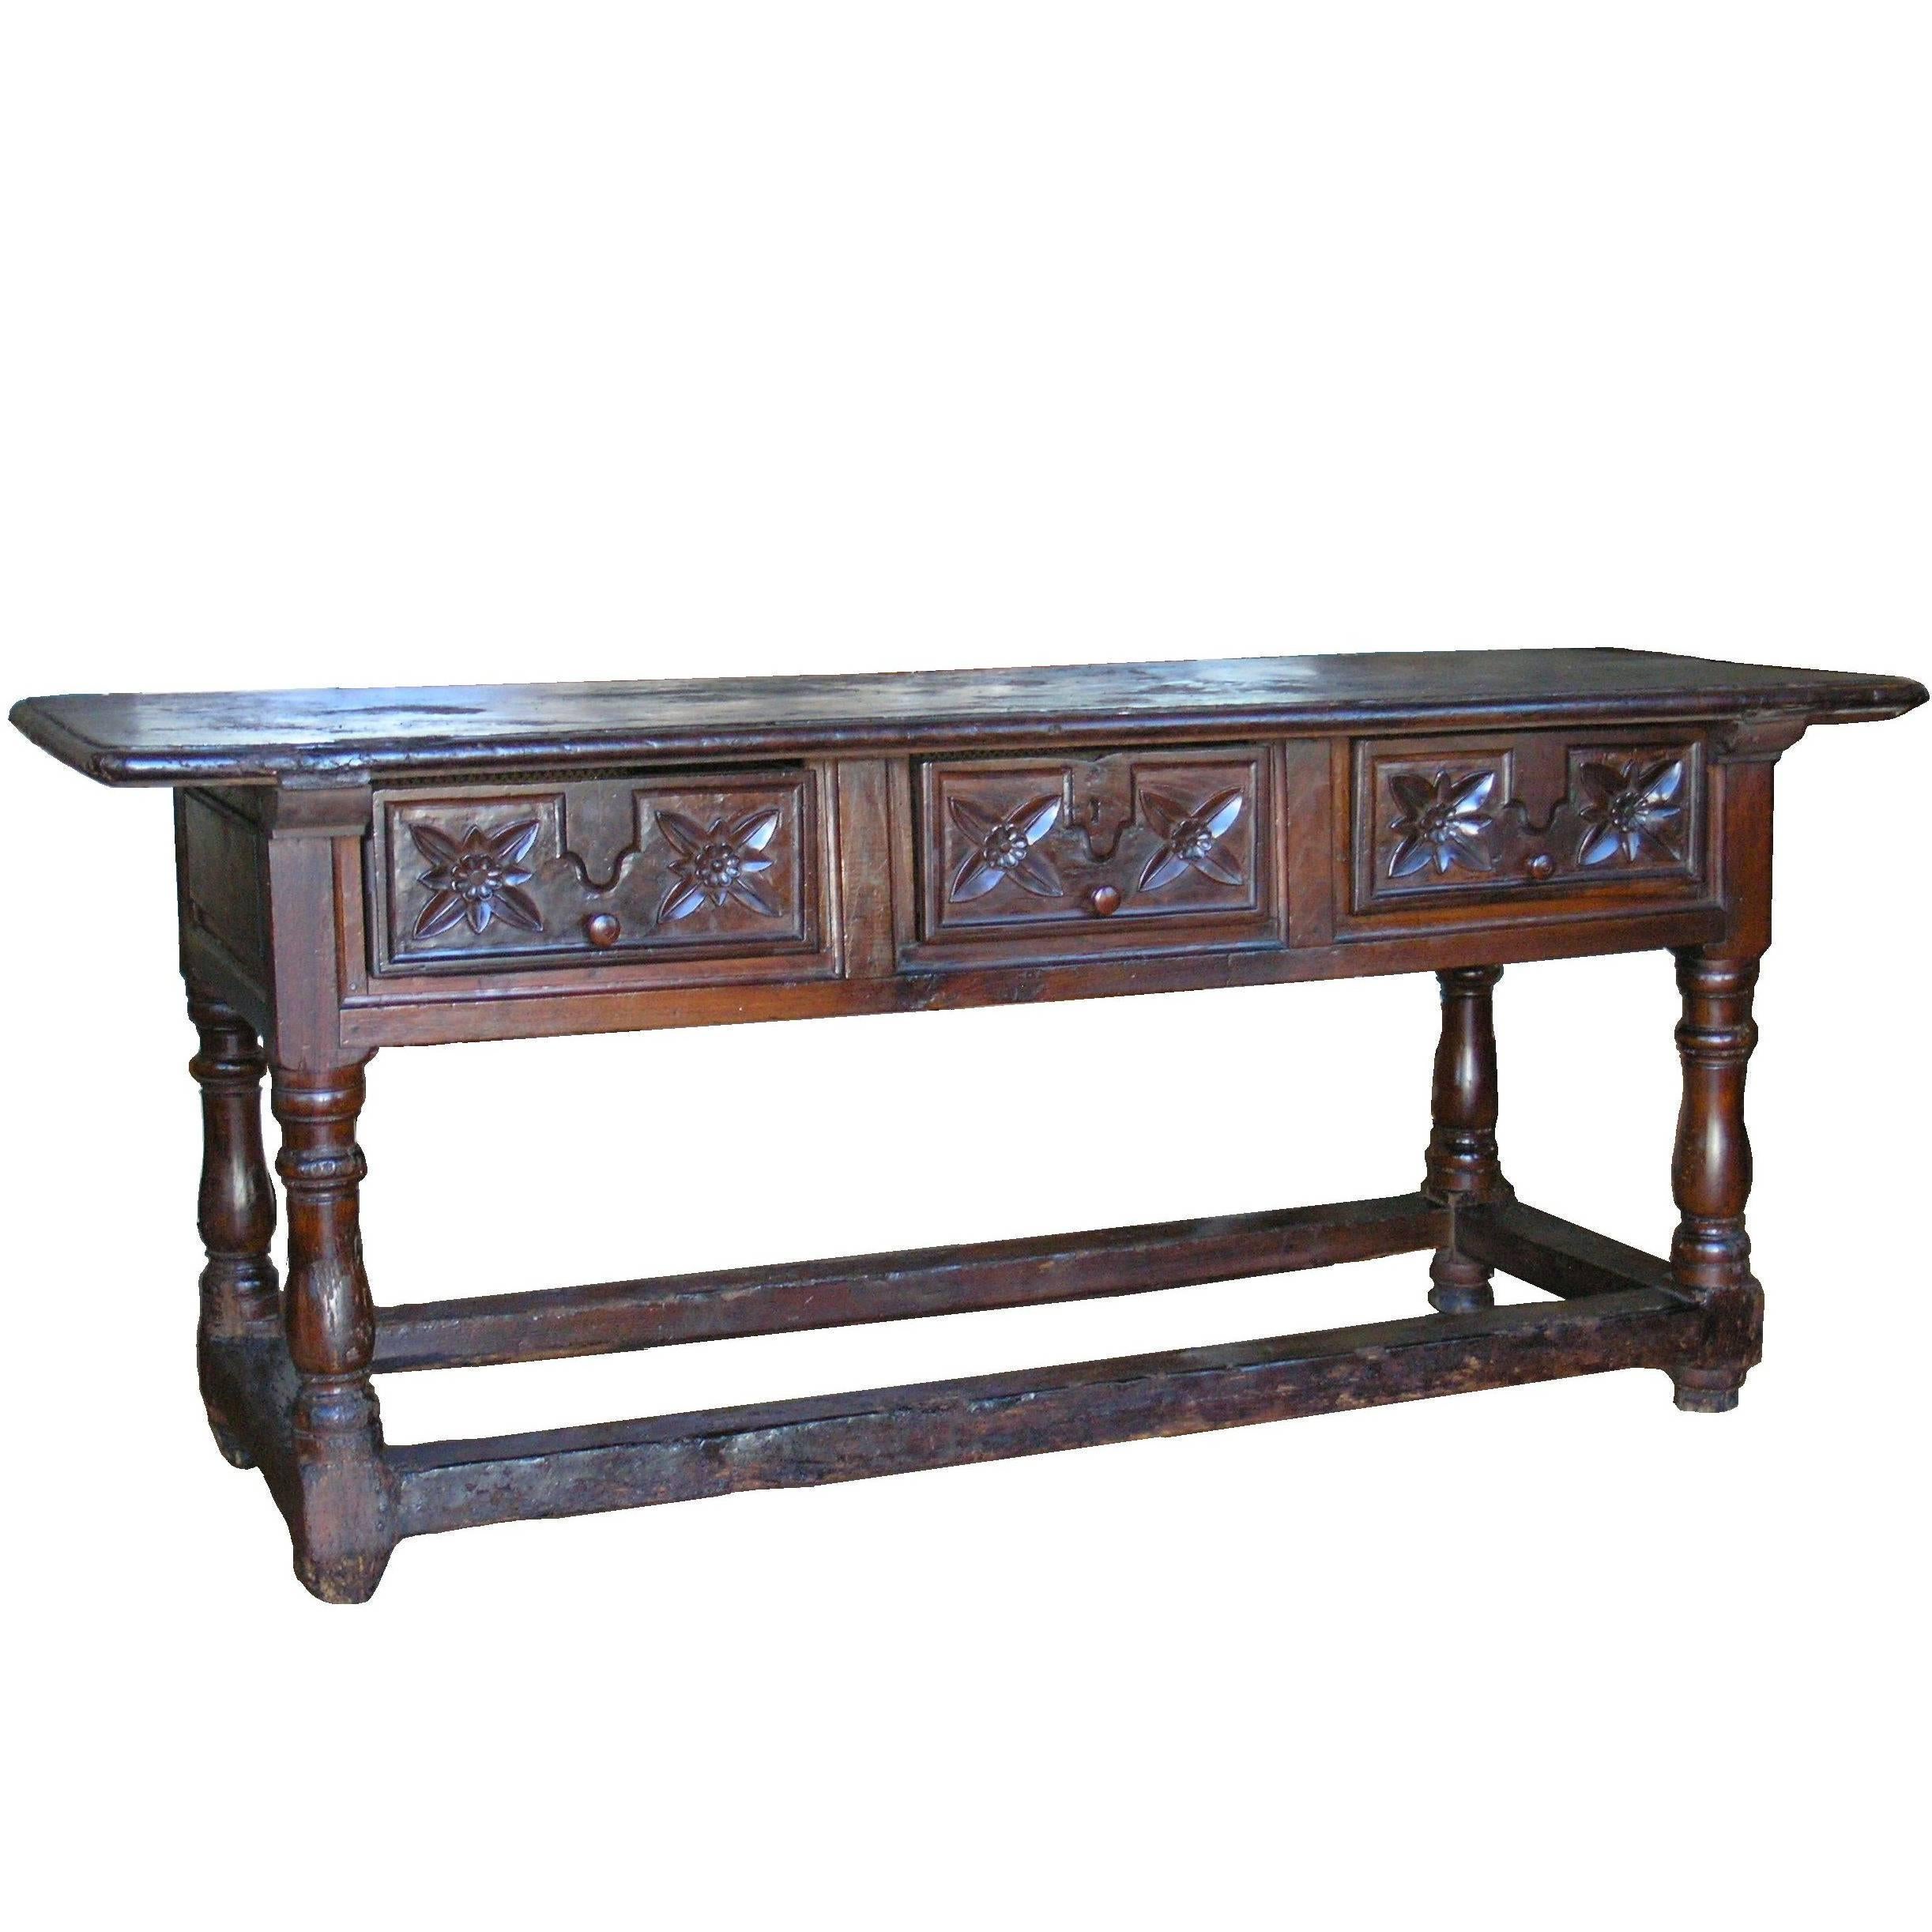  Walnut Baroque Table , Early 18th Century  For Sale